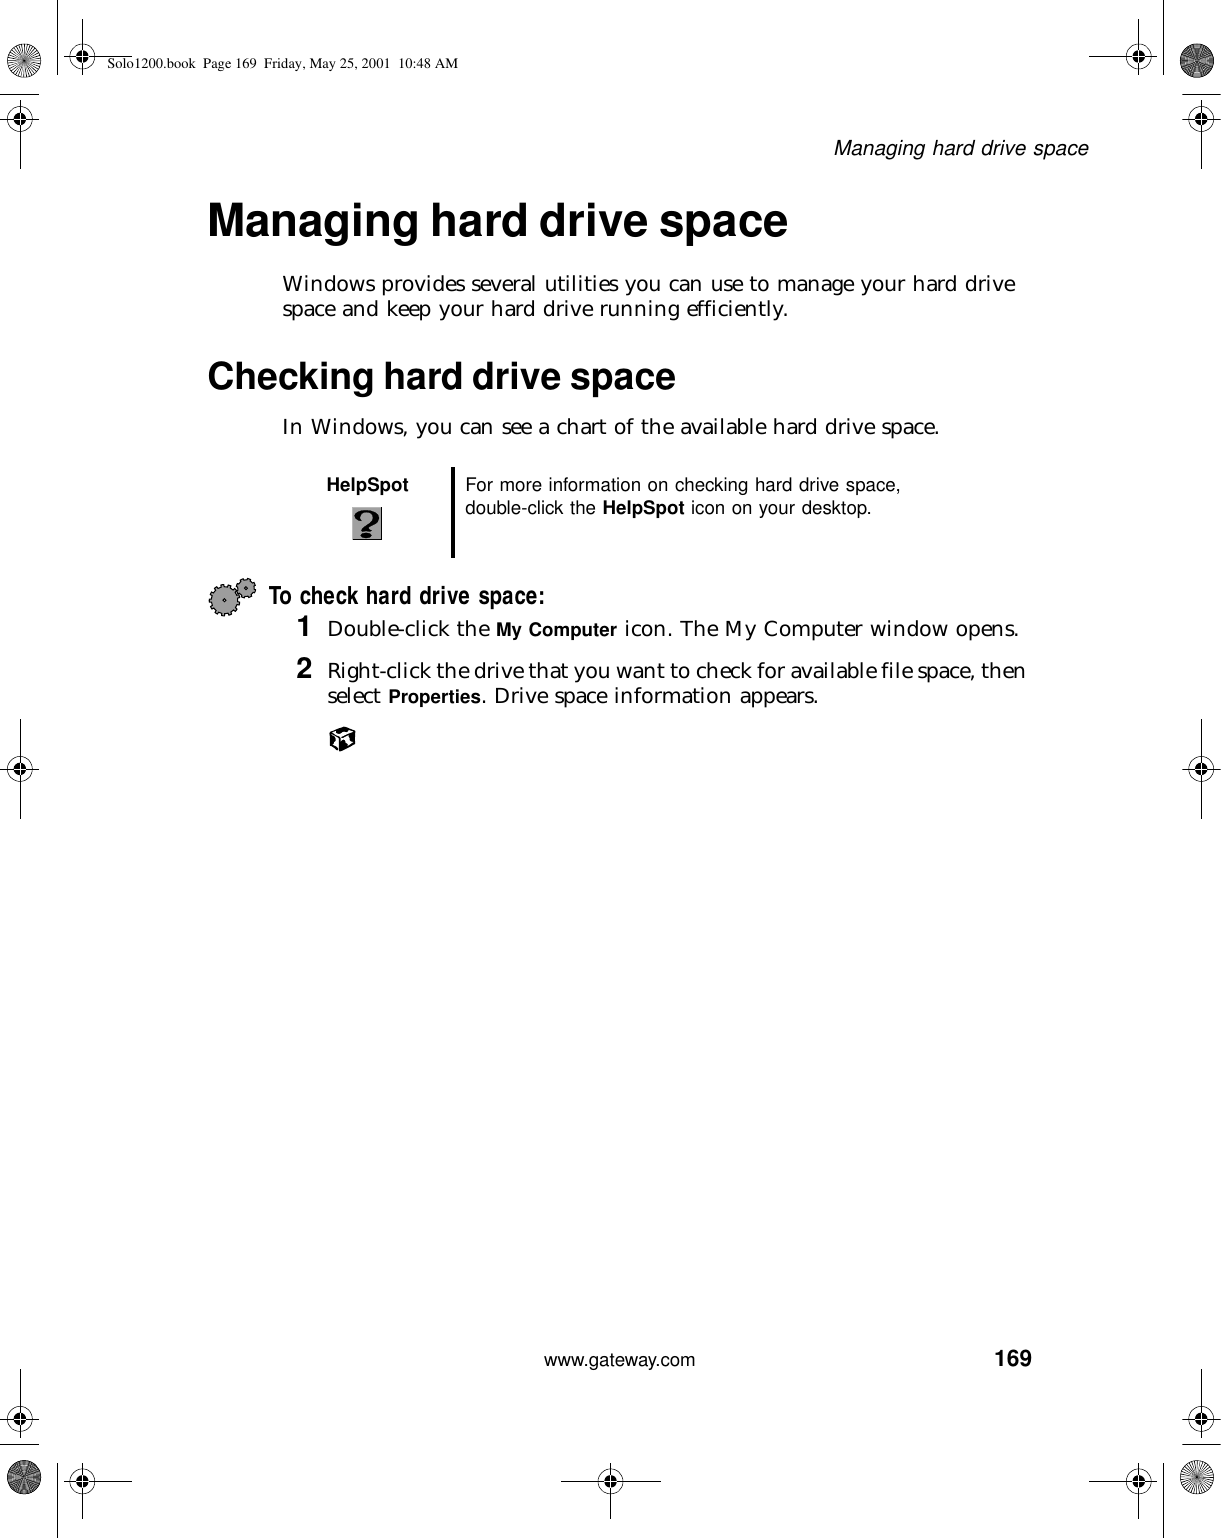 169Managing hard drive spacewww.gateway.comManaging hard drive spaceWindows provides several utilities you can use to manage your hard drive space and keep your hard drive running efficiently.Checking hard drive spaceIn Windows, you can see a chart of the available hard drive space.To check hard drive space:1Double-click the My Computer icon. The My Computer window opens.2Right-click the drive that you want to check for available file space, then select Properties. Drive space information appears.HelpSpot For more information on checking hard drive space, double-click the HelpSpot icon on your desktop.Solo1200.book Page 169 Friday, May 25, 2001 10:48 AM